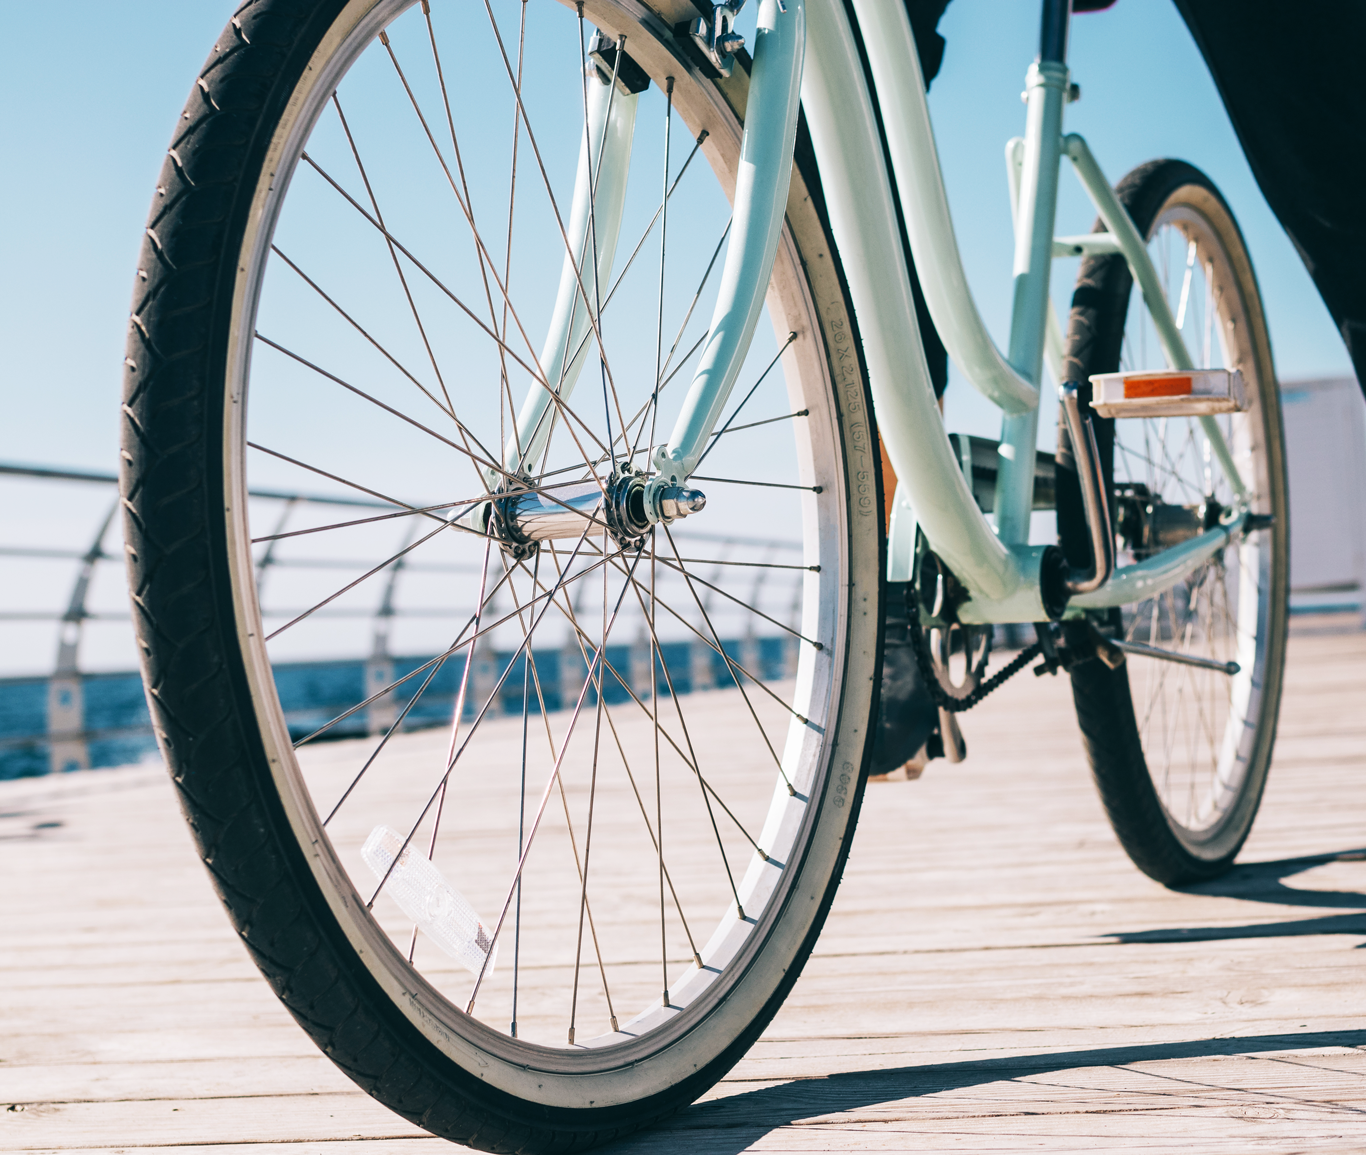 How do bicycles work? The science behind this 'simple' machine. - Bicycle Wheel 1366 0519.png?wiDth=2049&name=Bicycle Wheel 1366 0519